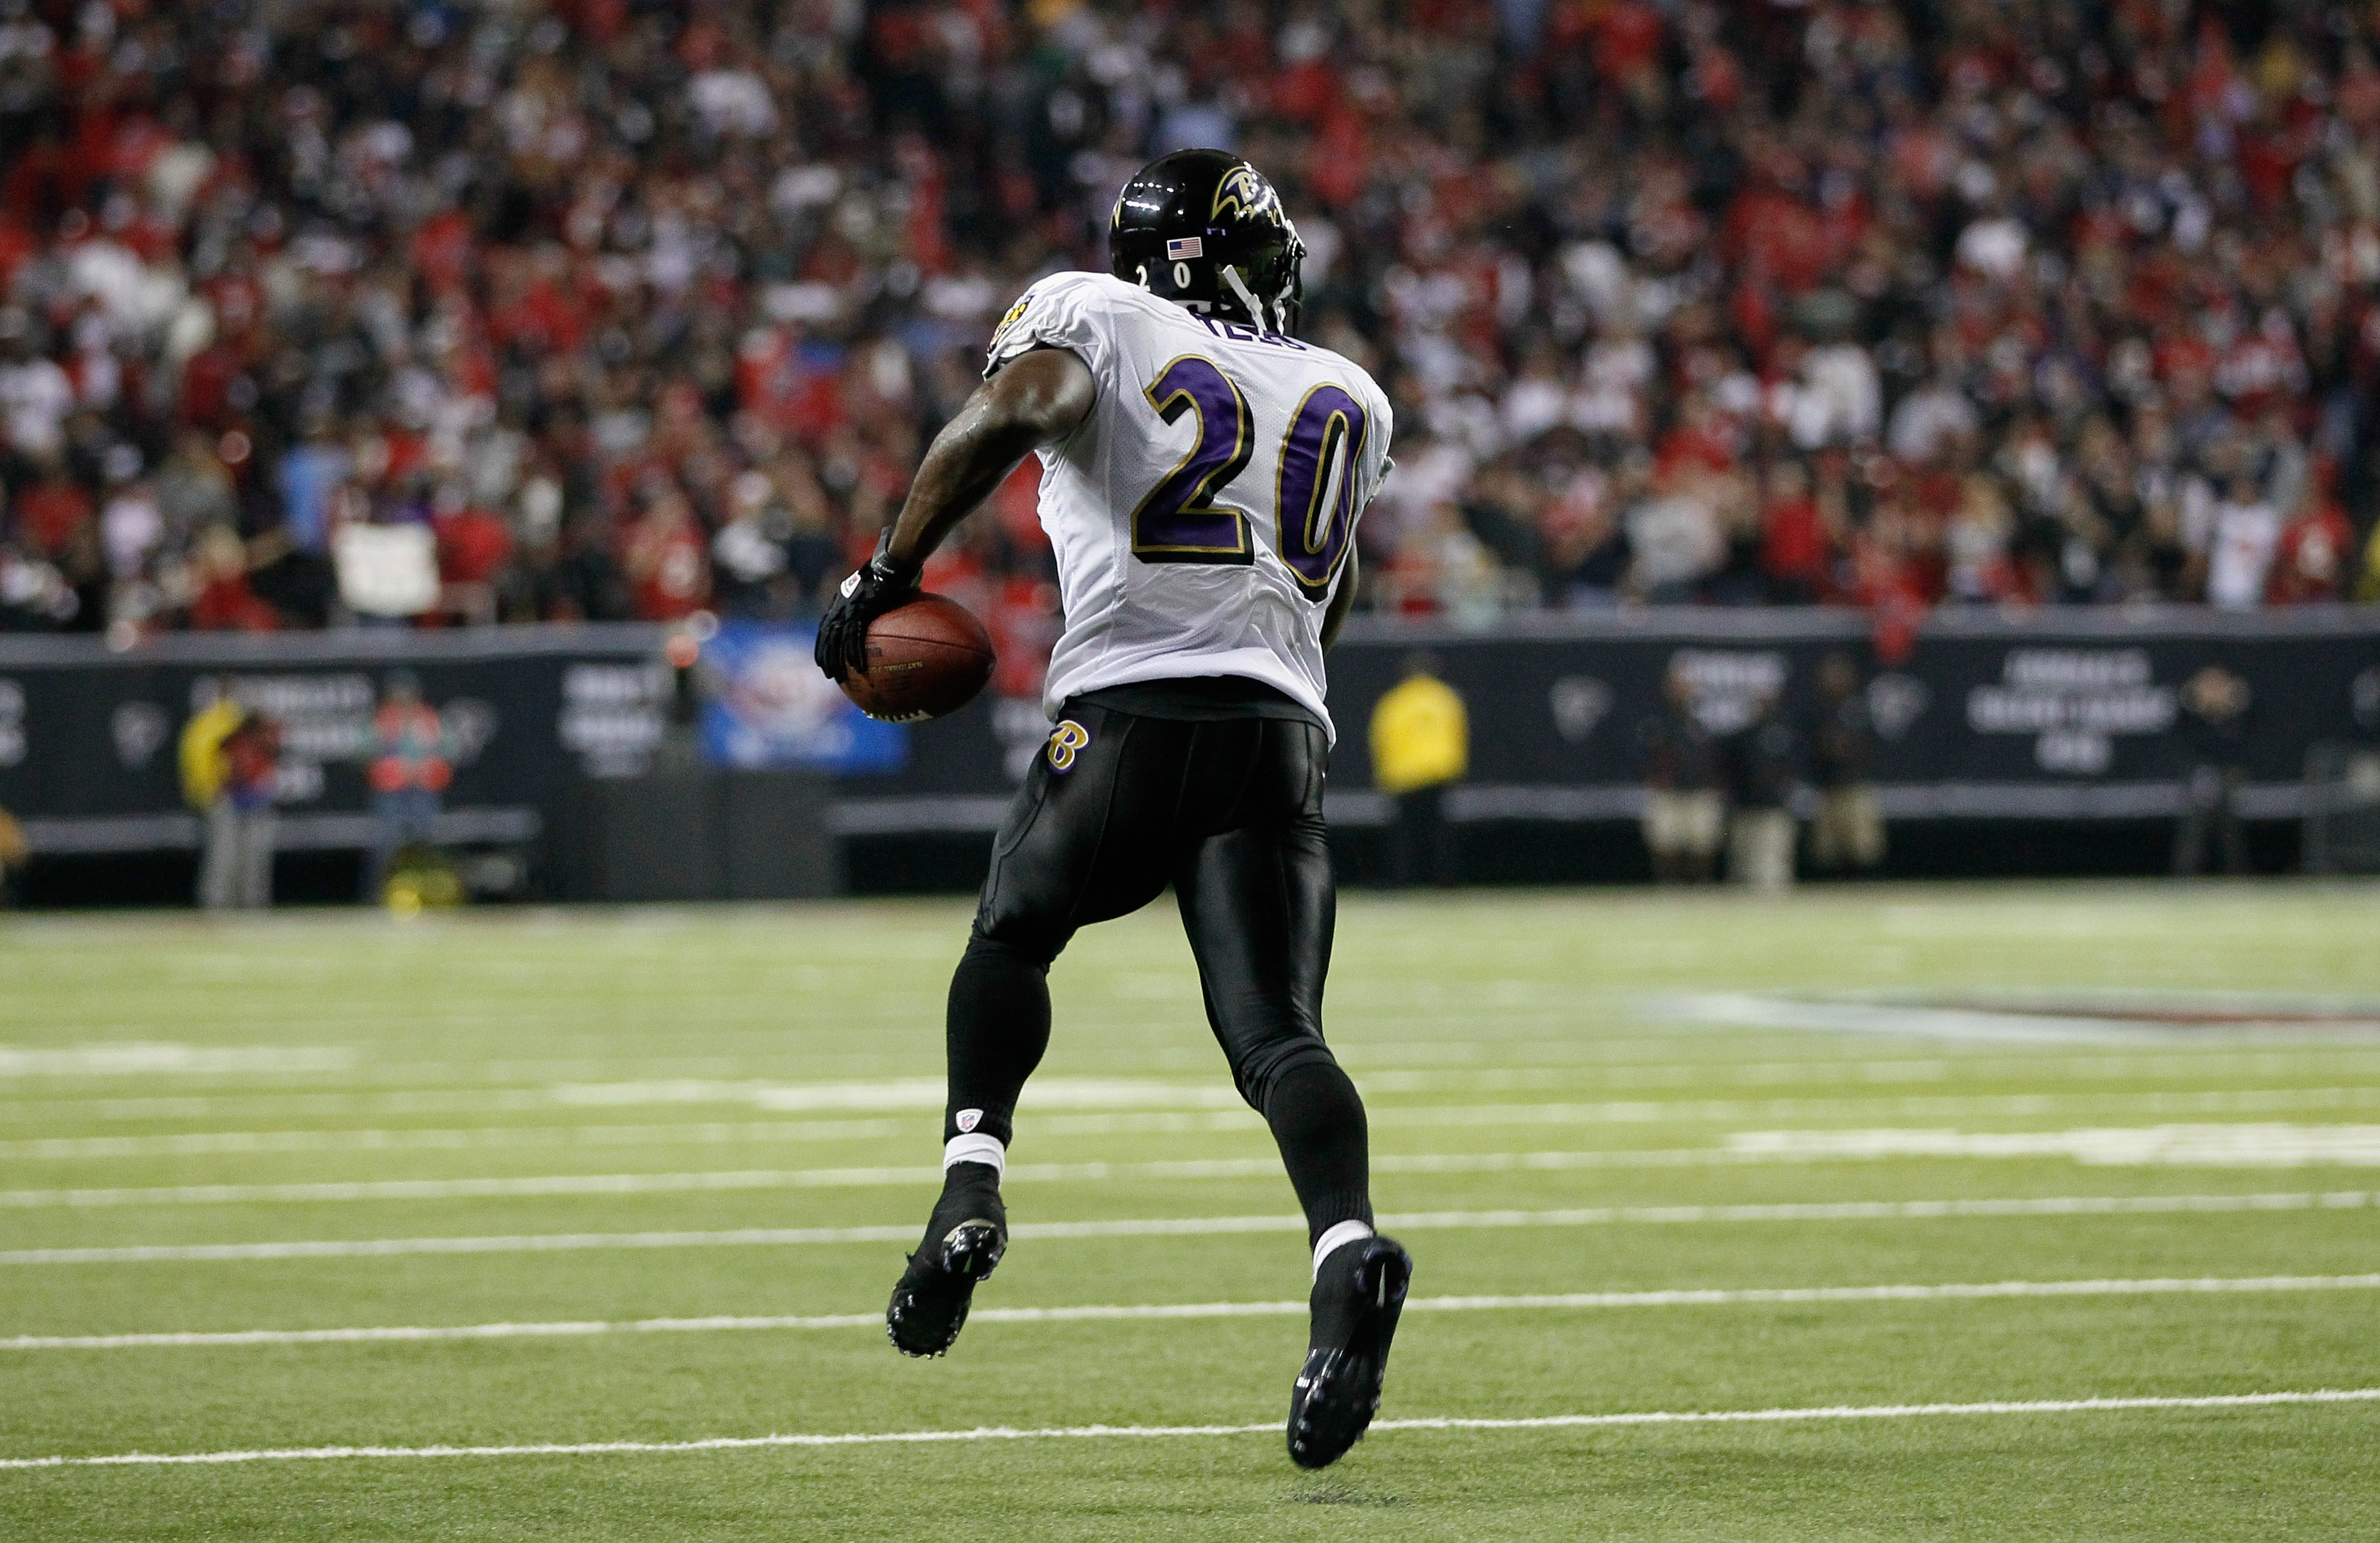 Ravens Vs. Steelers: Who's The Better Safety, Ed Reed Or Troy